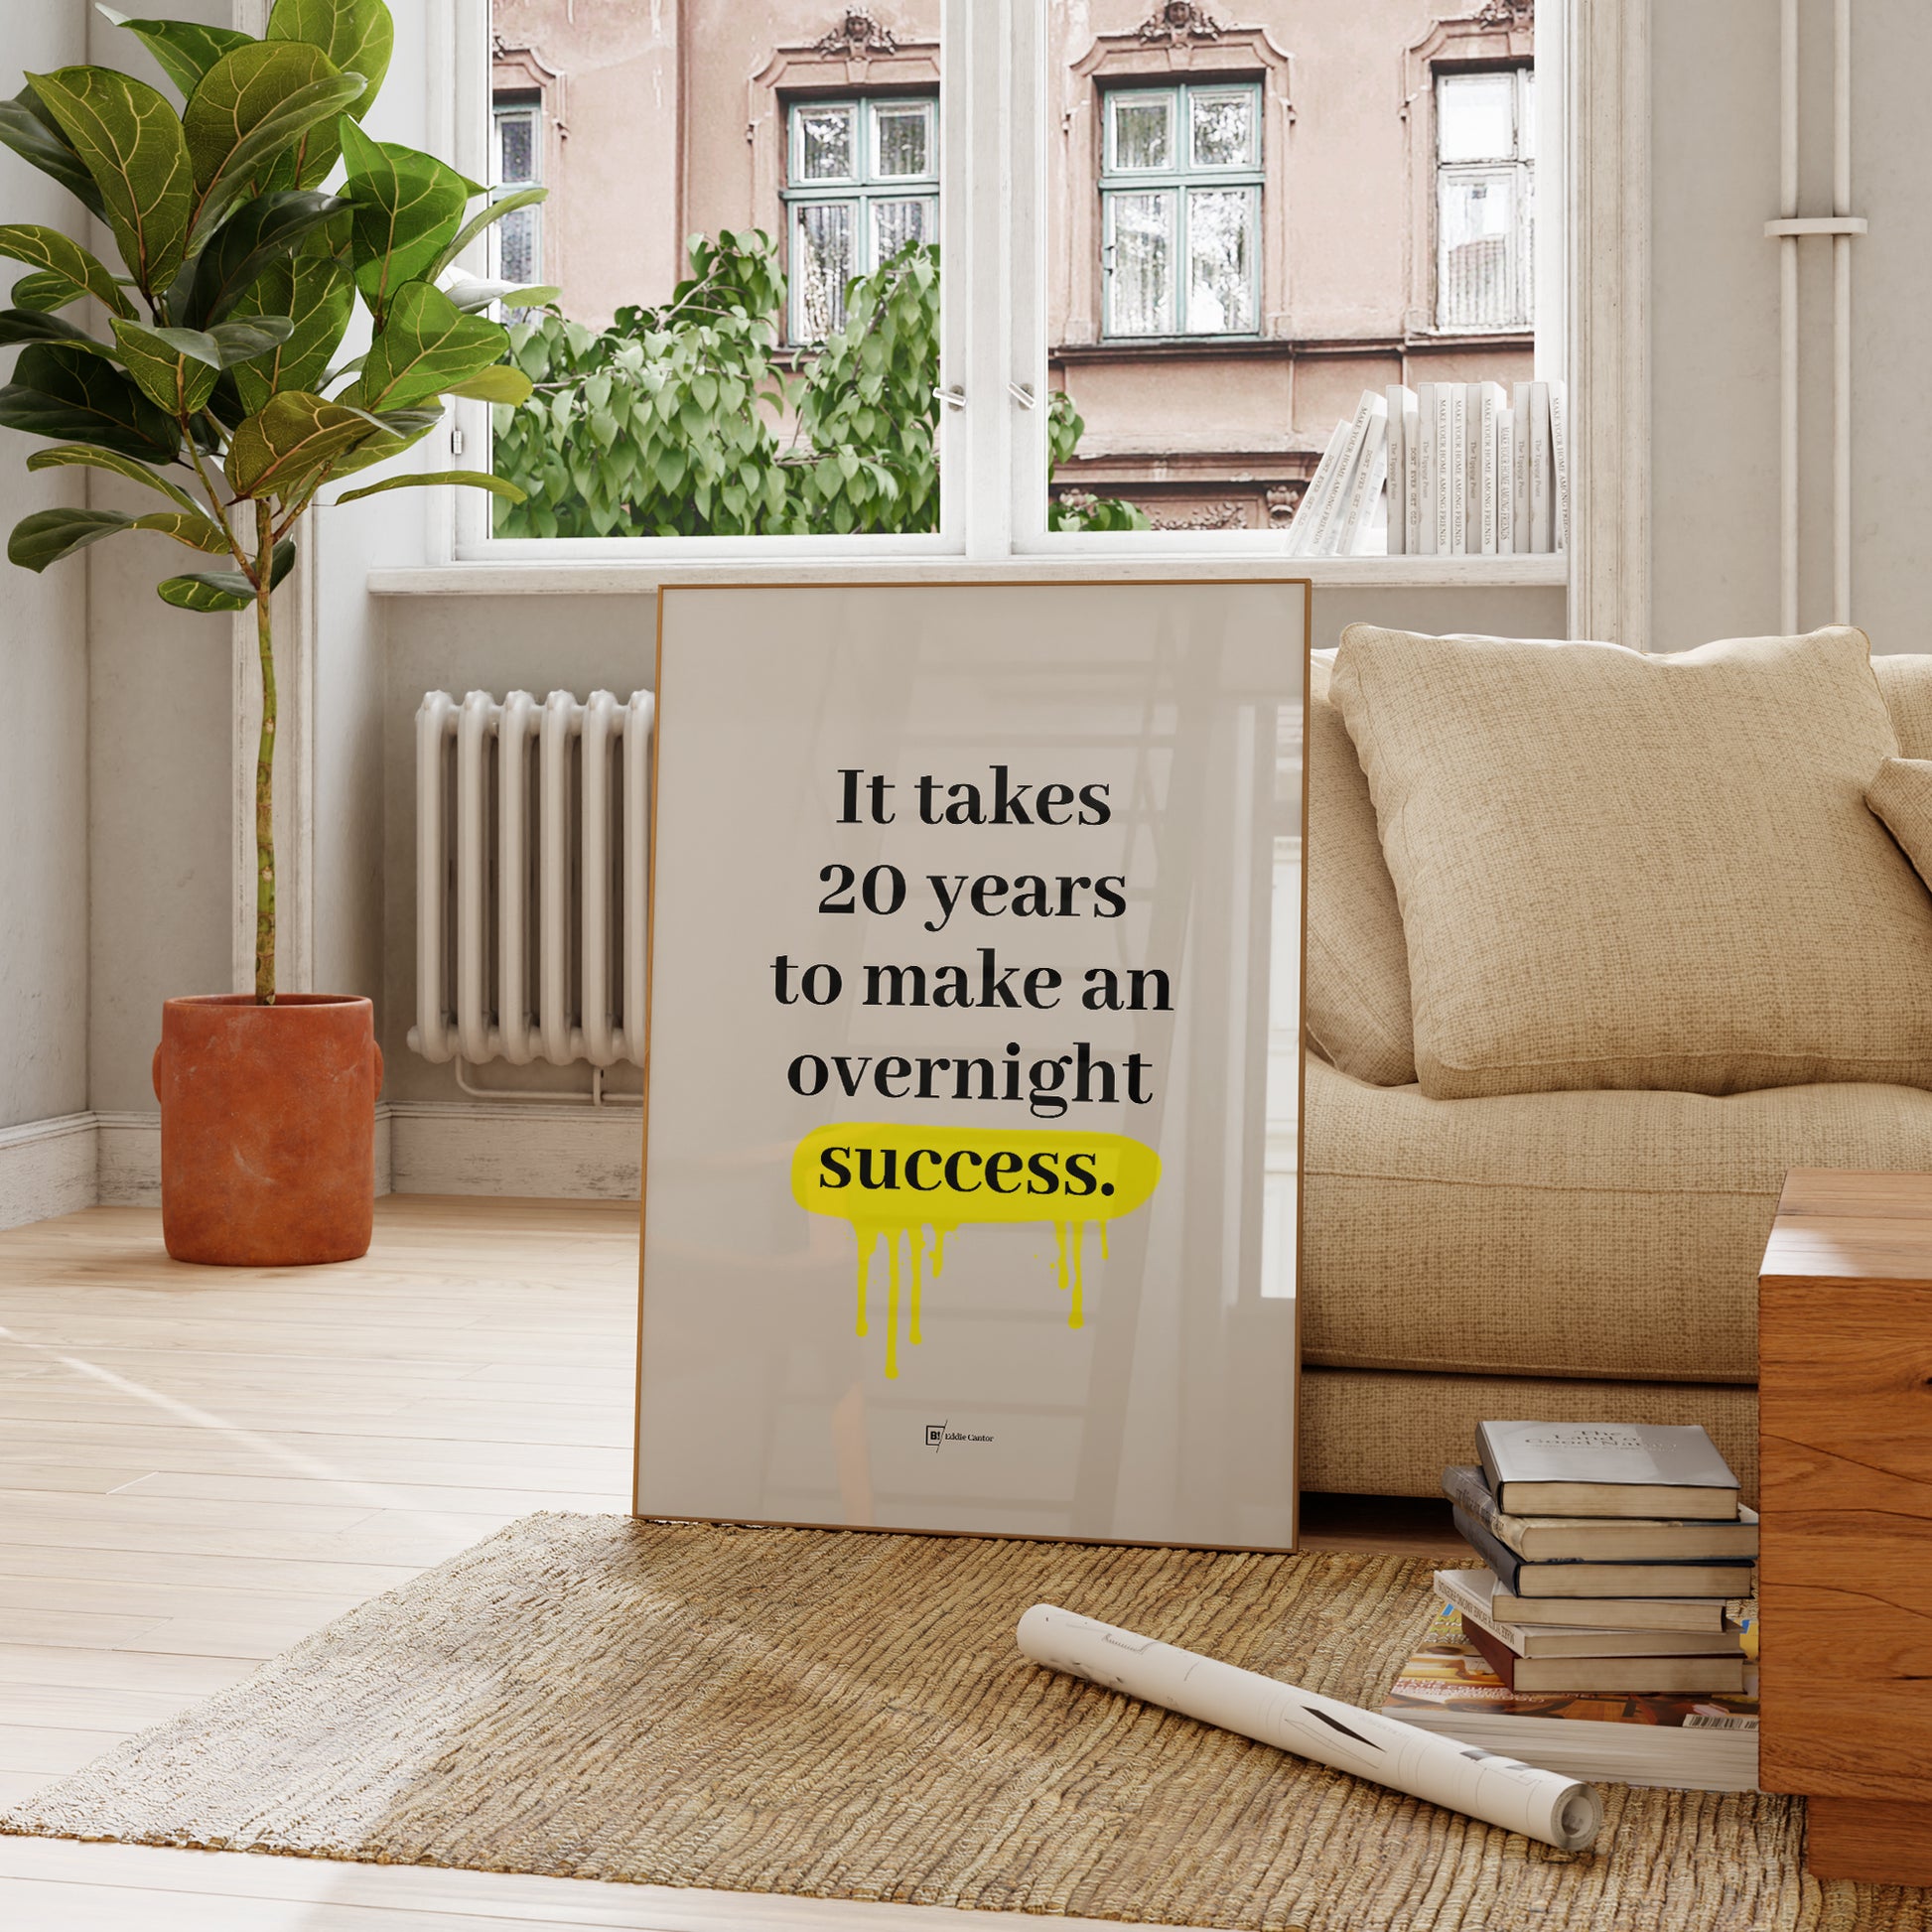 Be inspired by Eddie Cantor's famous "It takes 20 years to make an overnight success" quote art print. This artwork was printed using the giclée process on archival acid-free paper and is presented in a french living room that captures its timeless beauty in every detail.